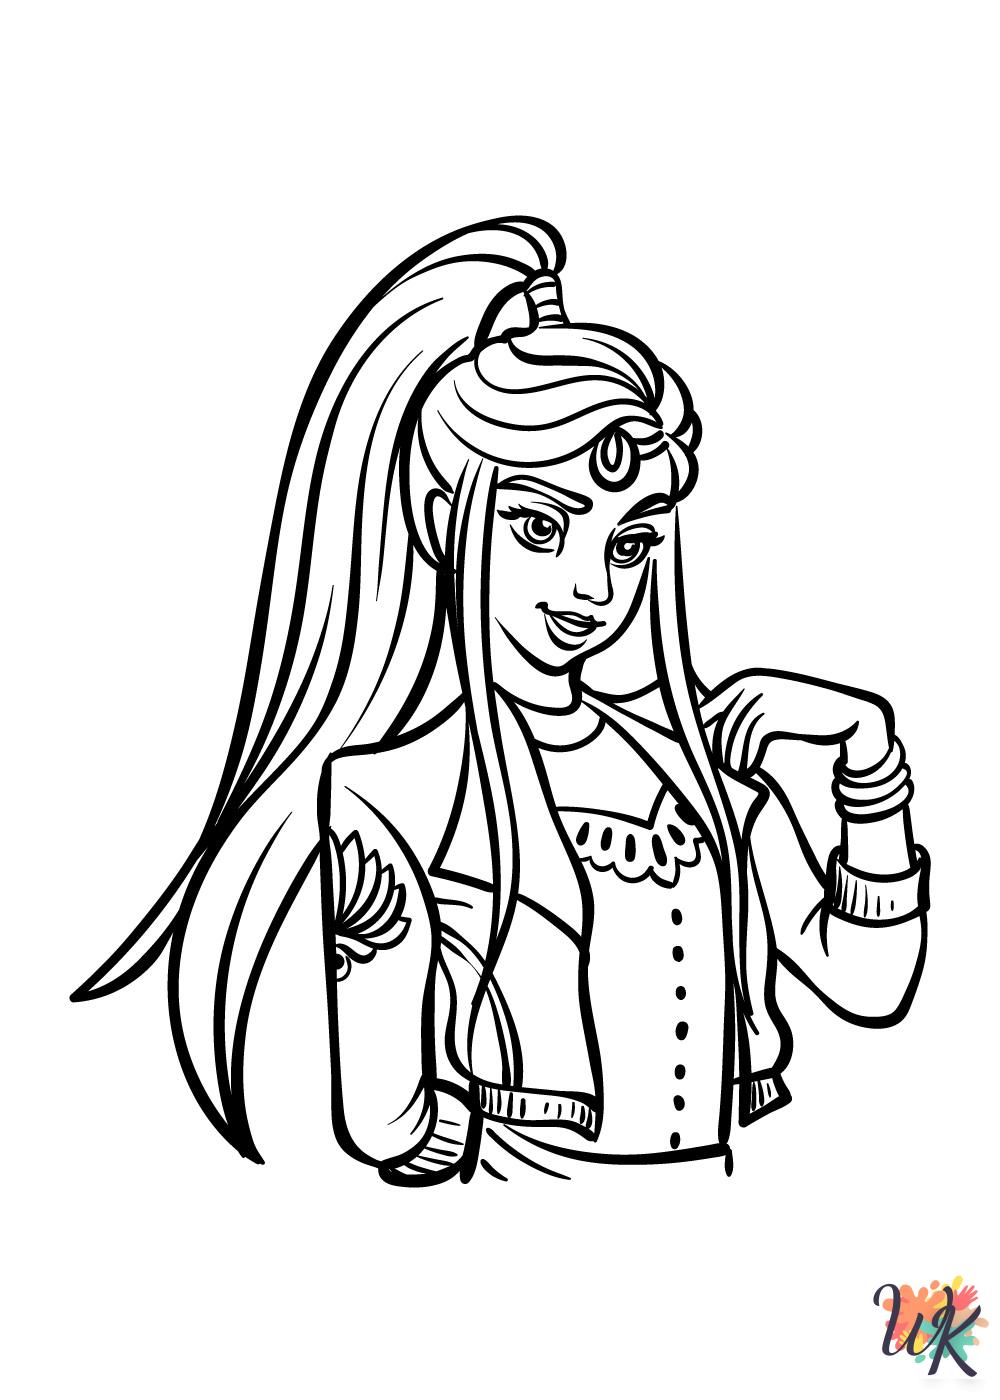 Descendants coloring pages for adults